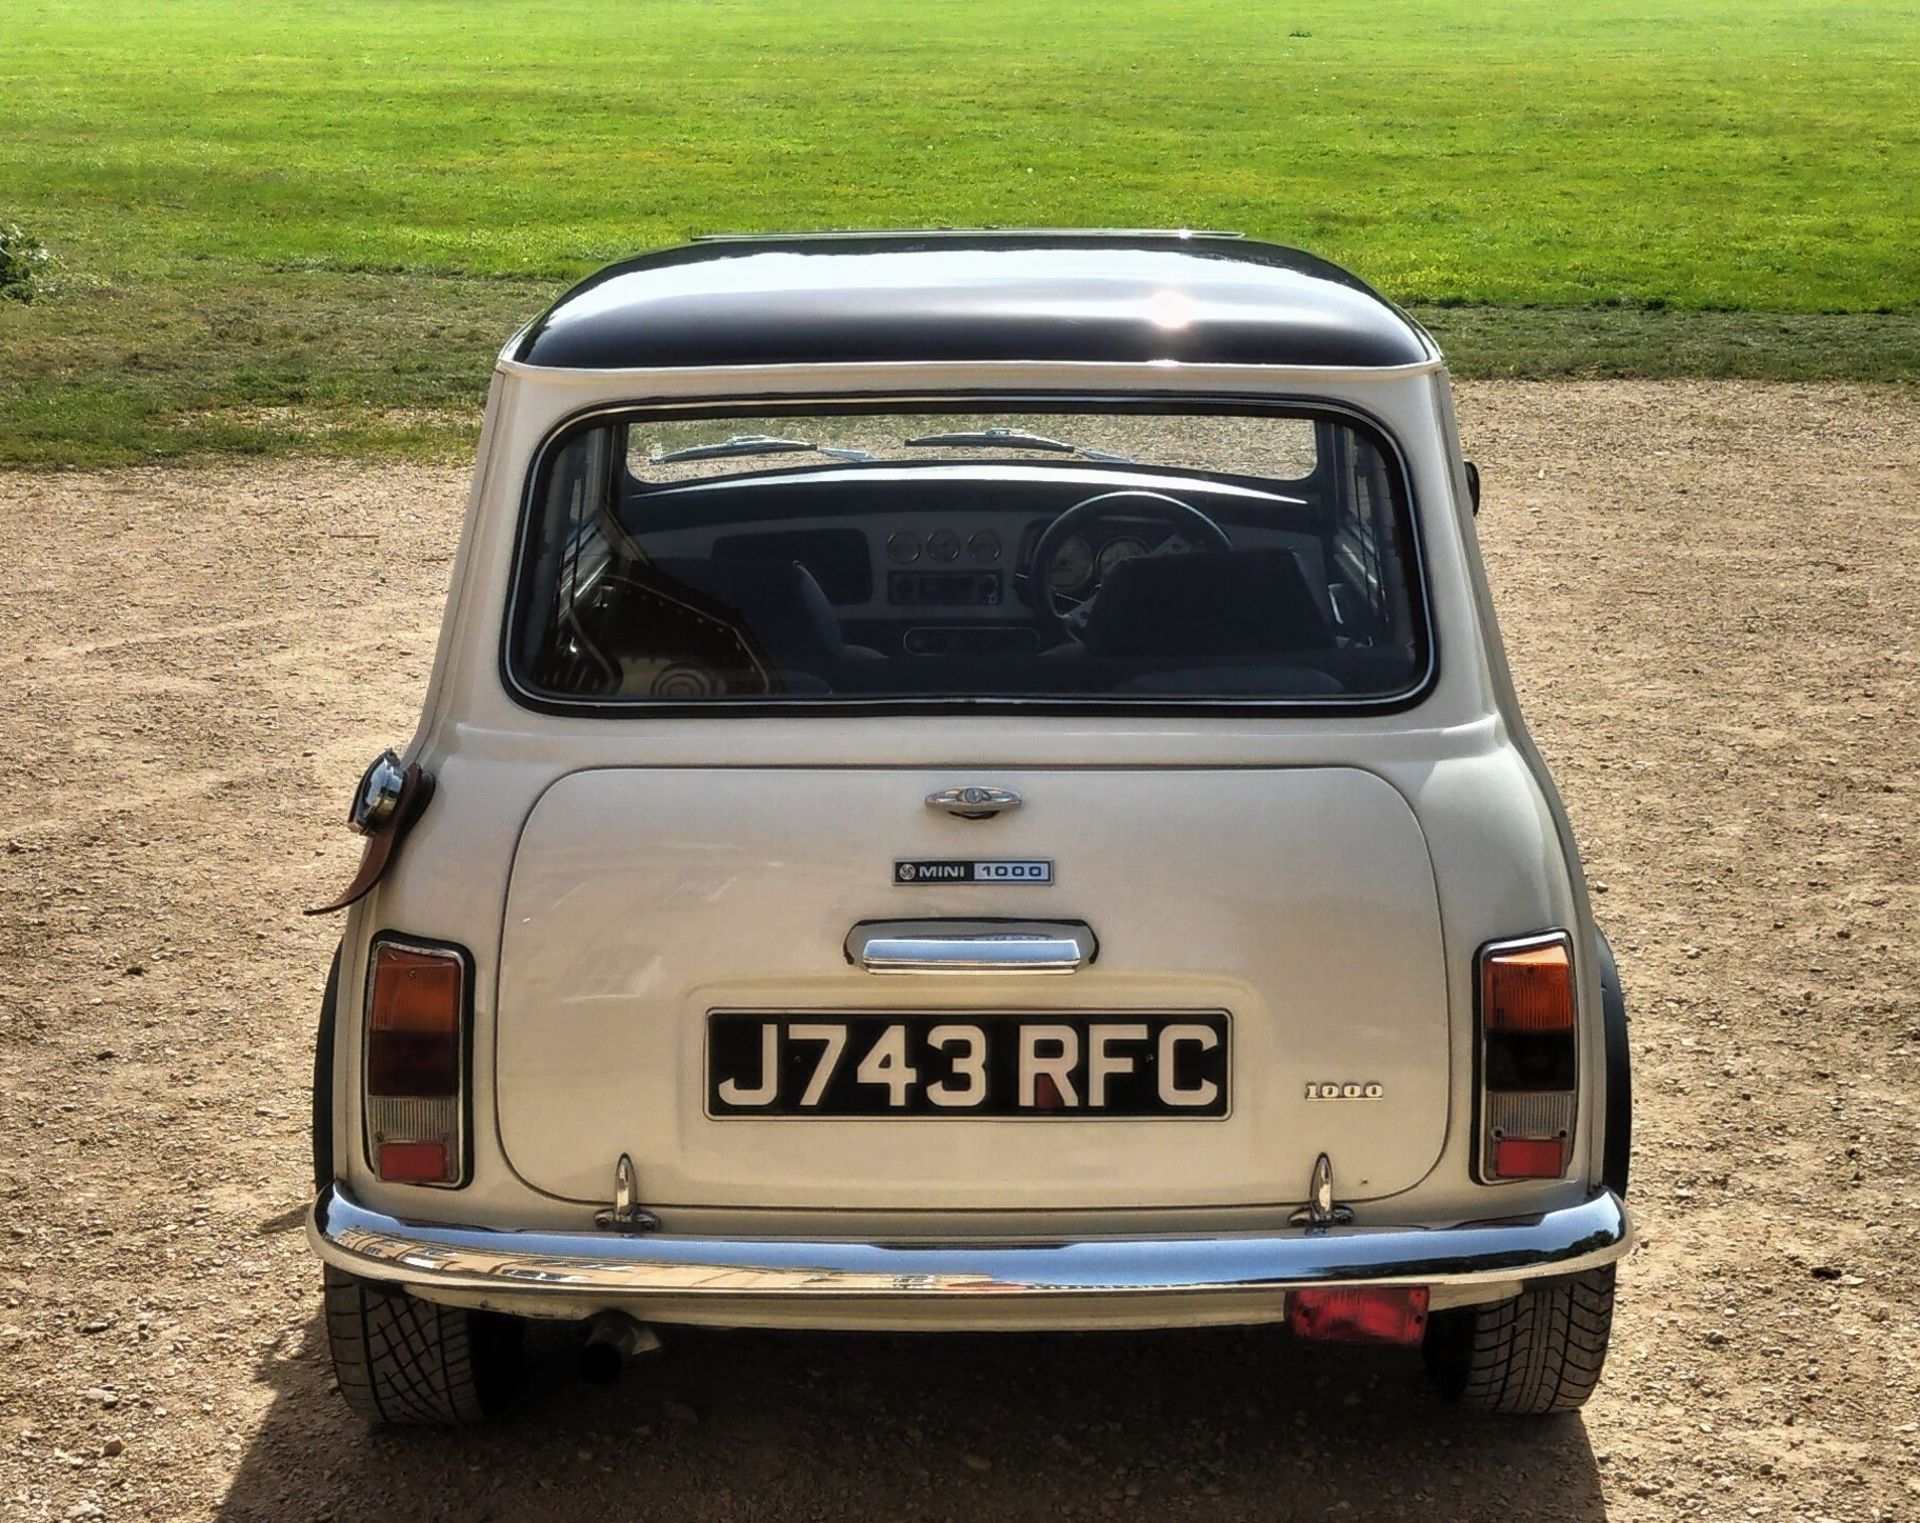 1992 ROVER MINI  Registration Number: J743 RFC Chassis Number: SAXXL2S1020509521 Launched in 1959, - Image 8 of 23